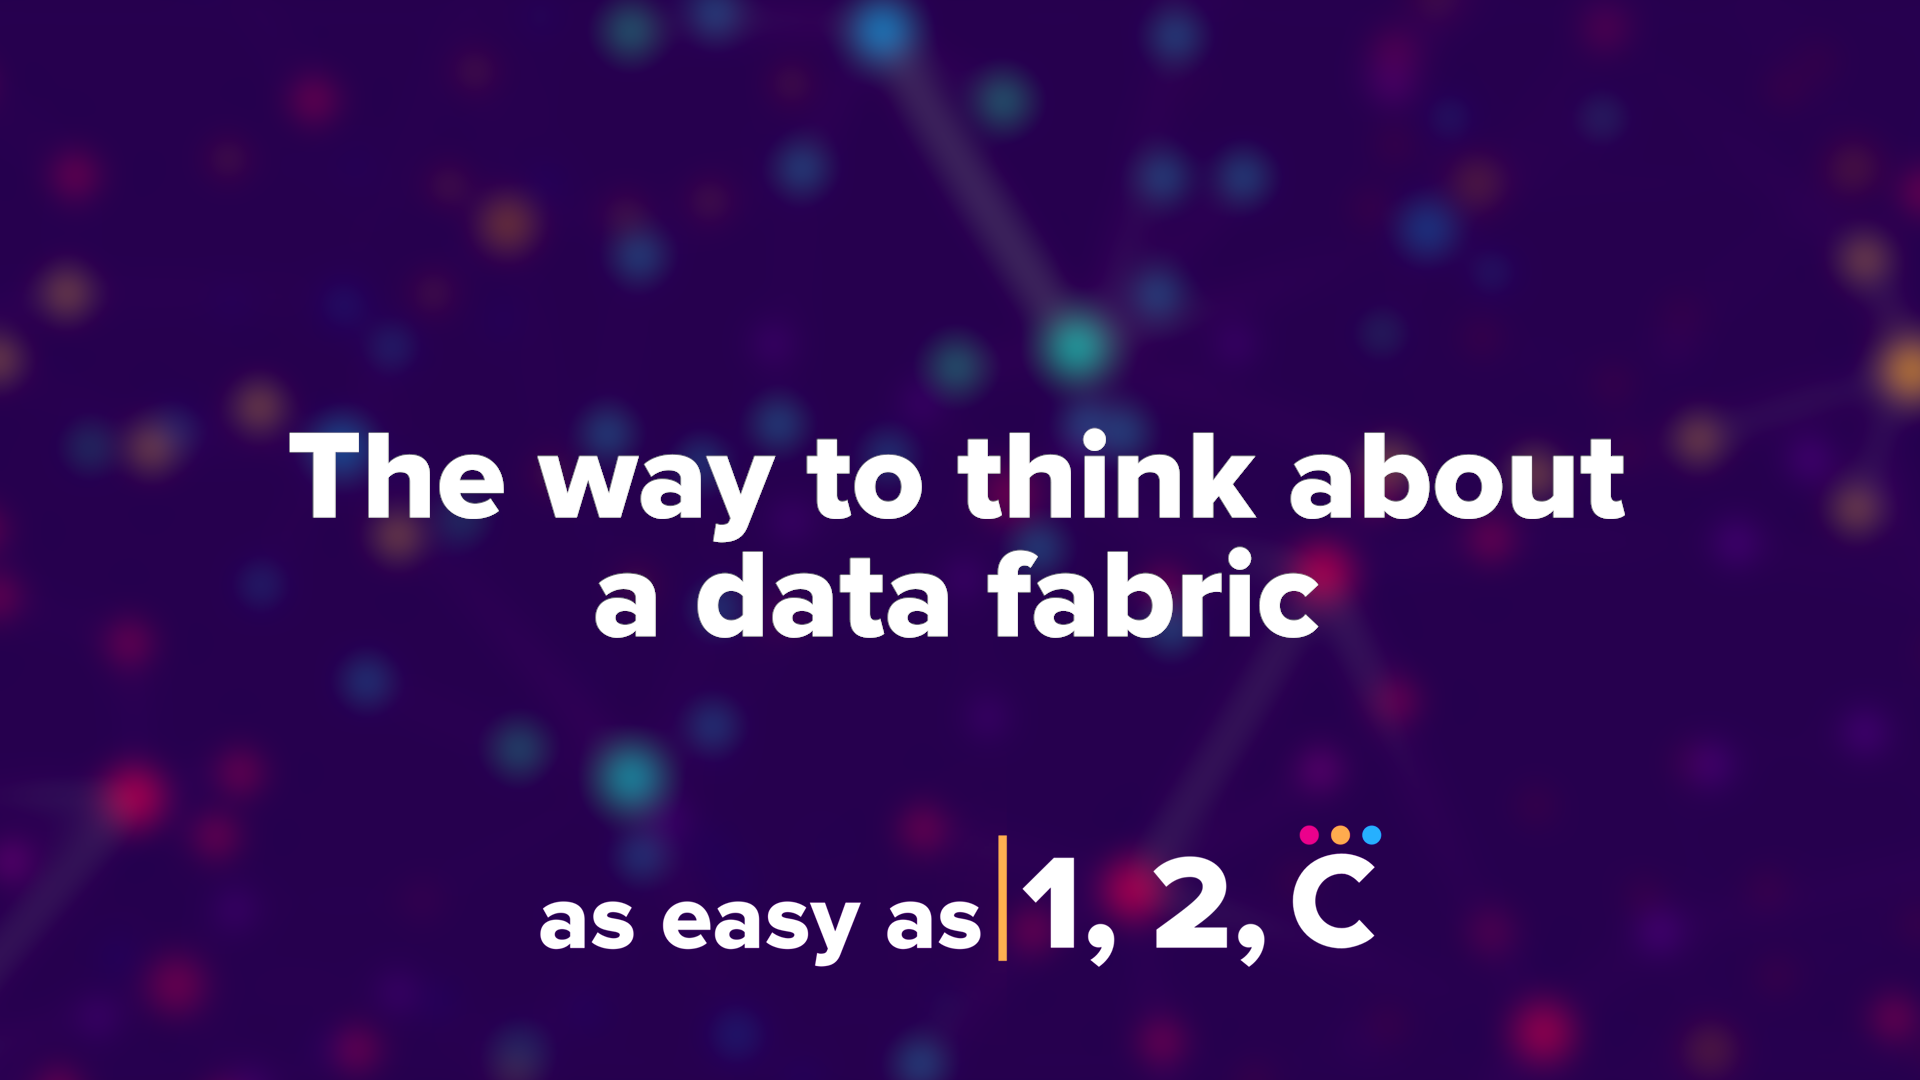 As Easy As 1, 2, C: The Way To Think About A Data Fabric